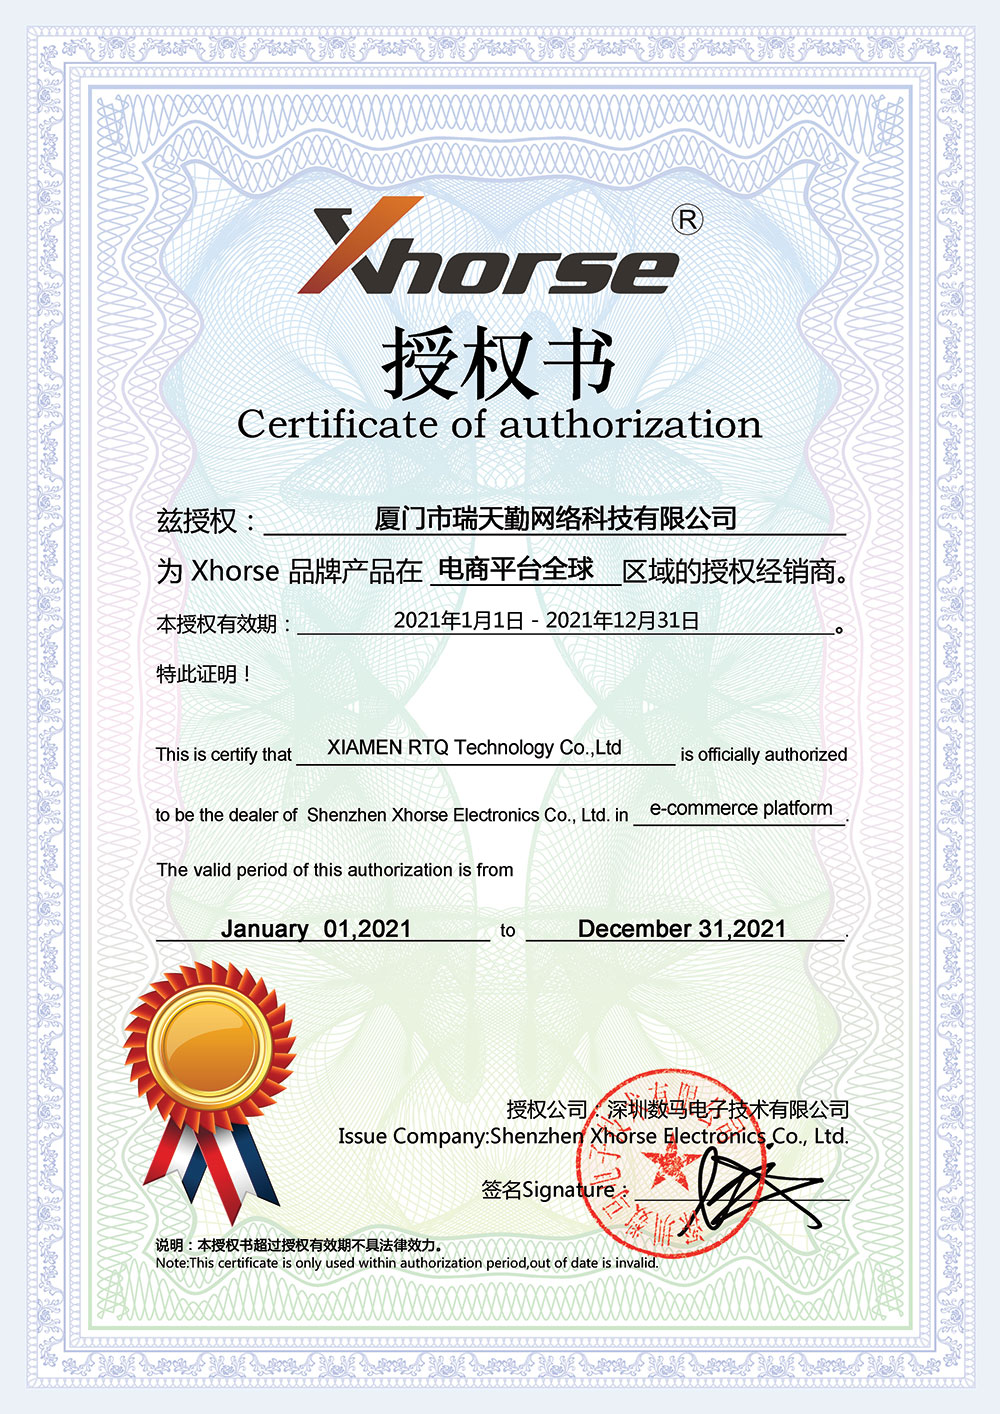 Xhorse Certificate of Authorization